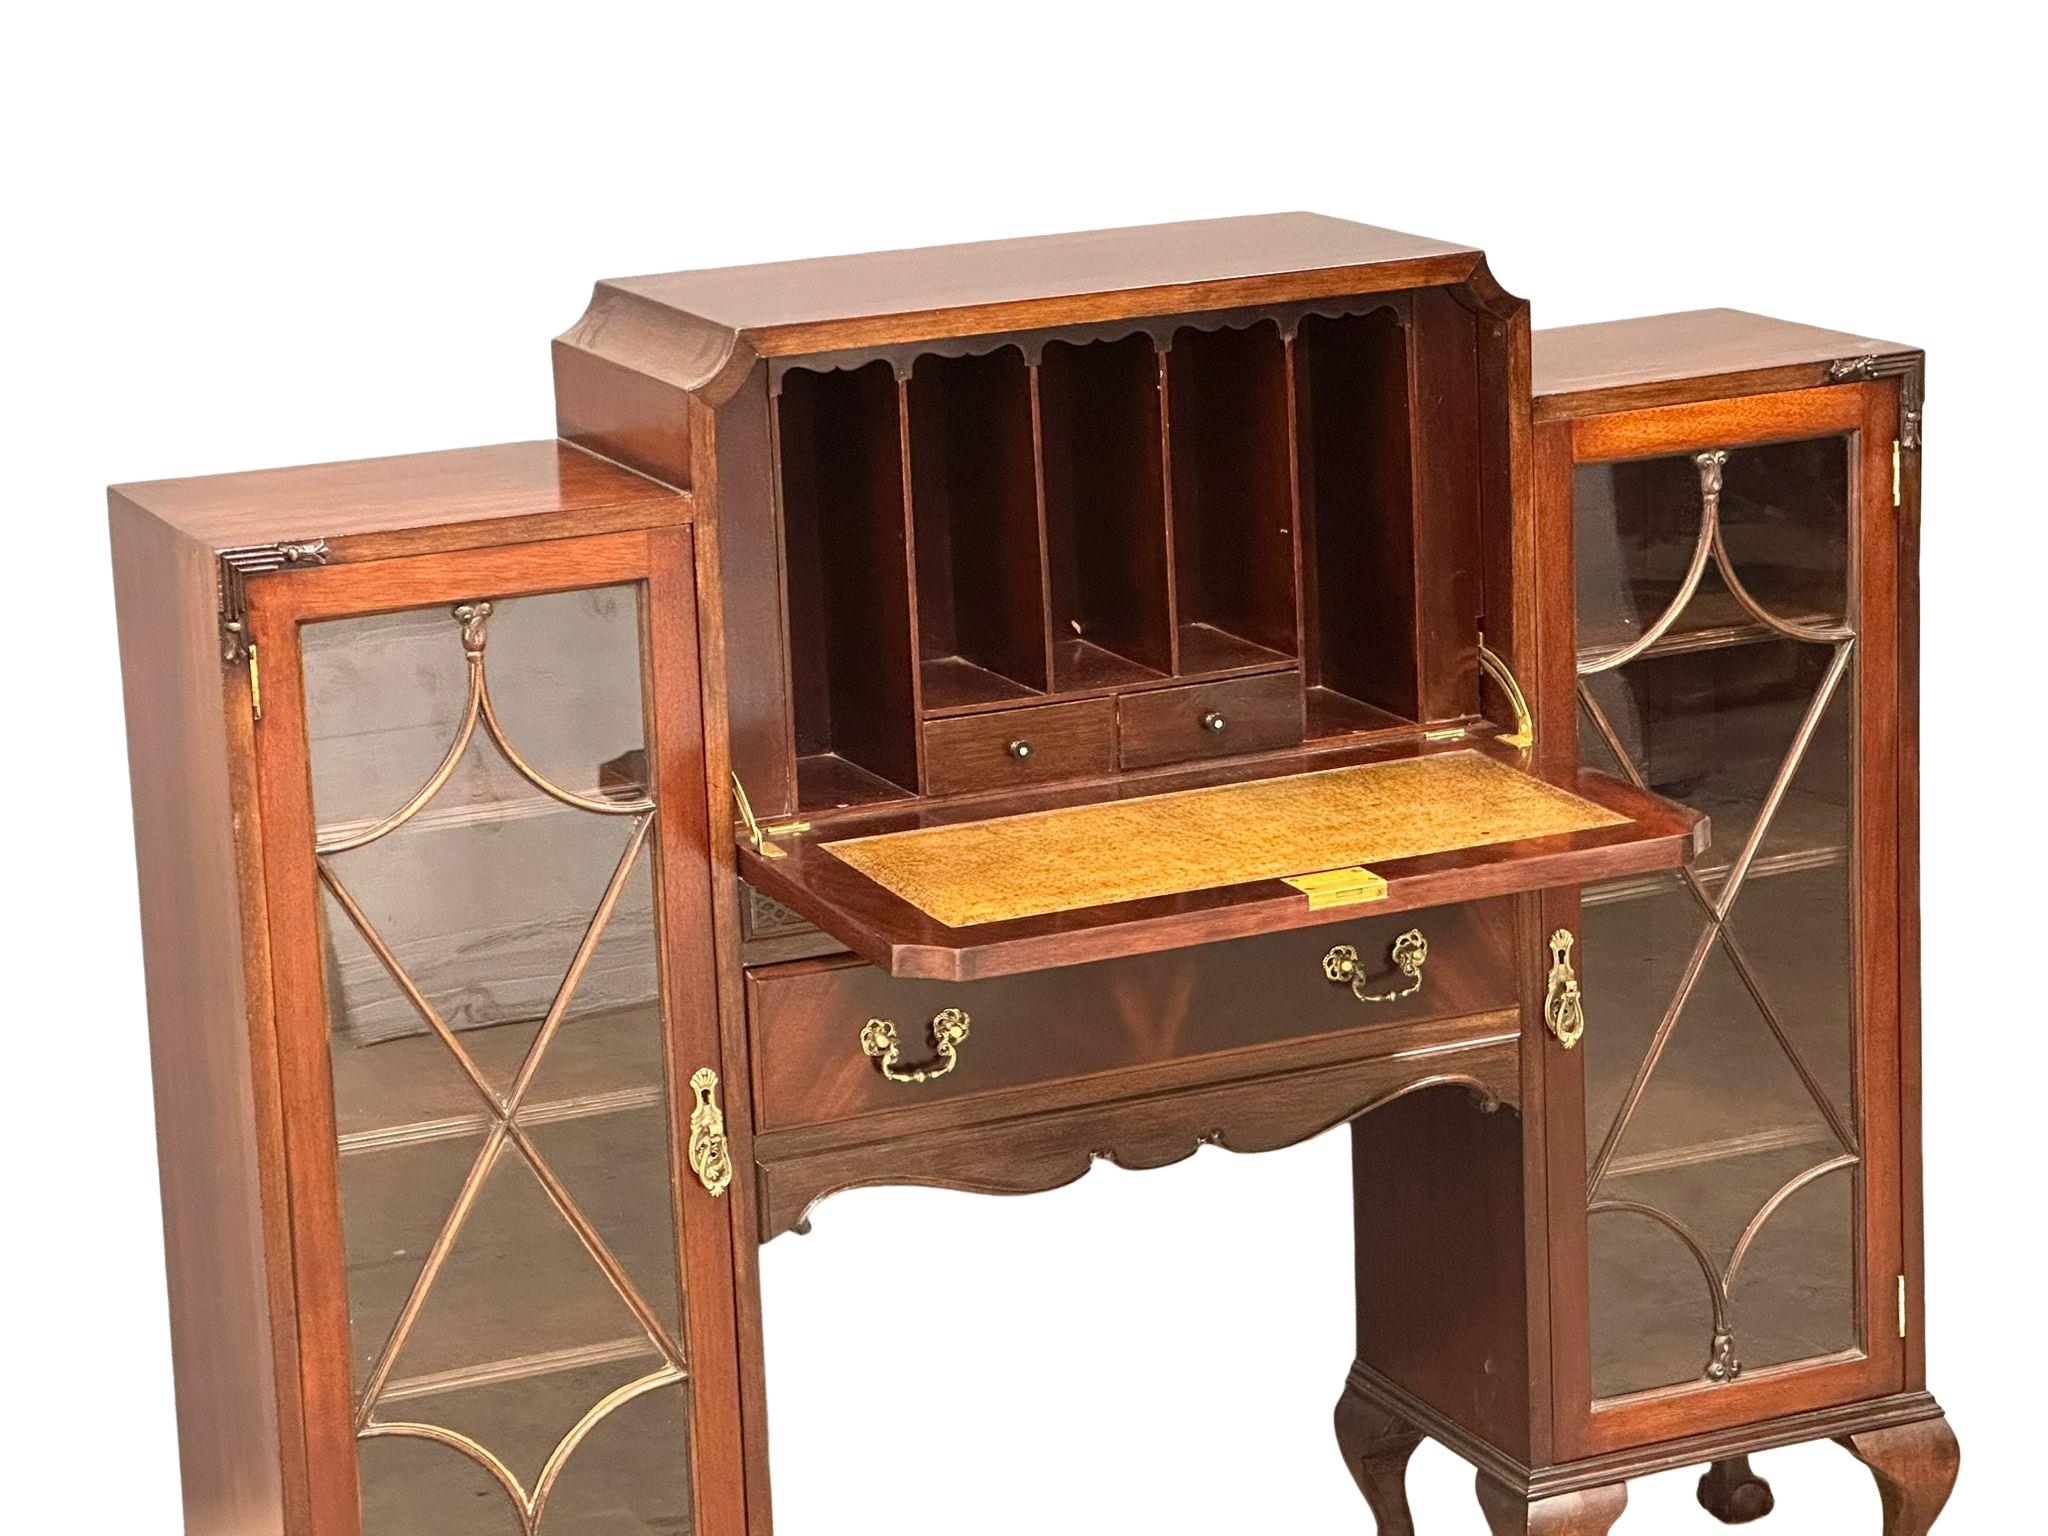 A large, early 20th Century Chippendale Revival bureau display cabinet. Circa 1910-1930. - Image 3 of 4